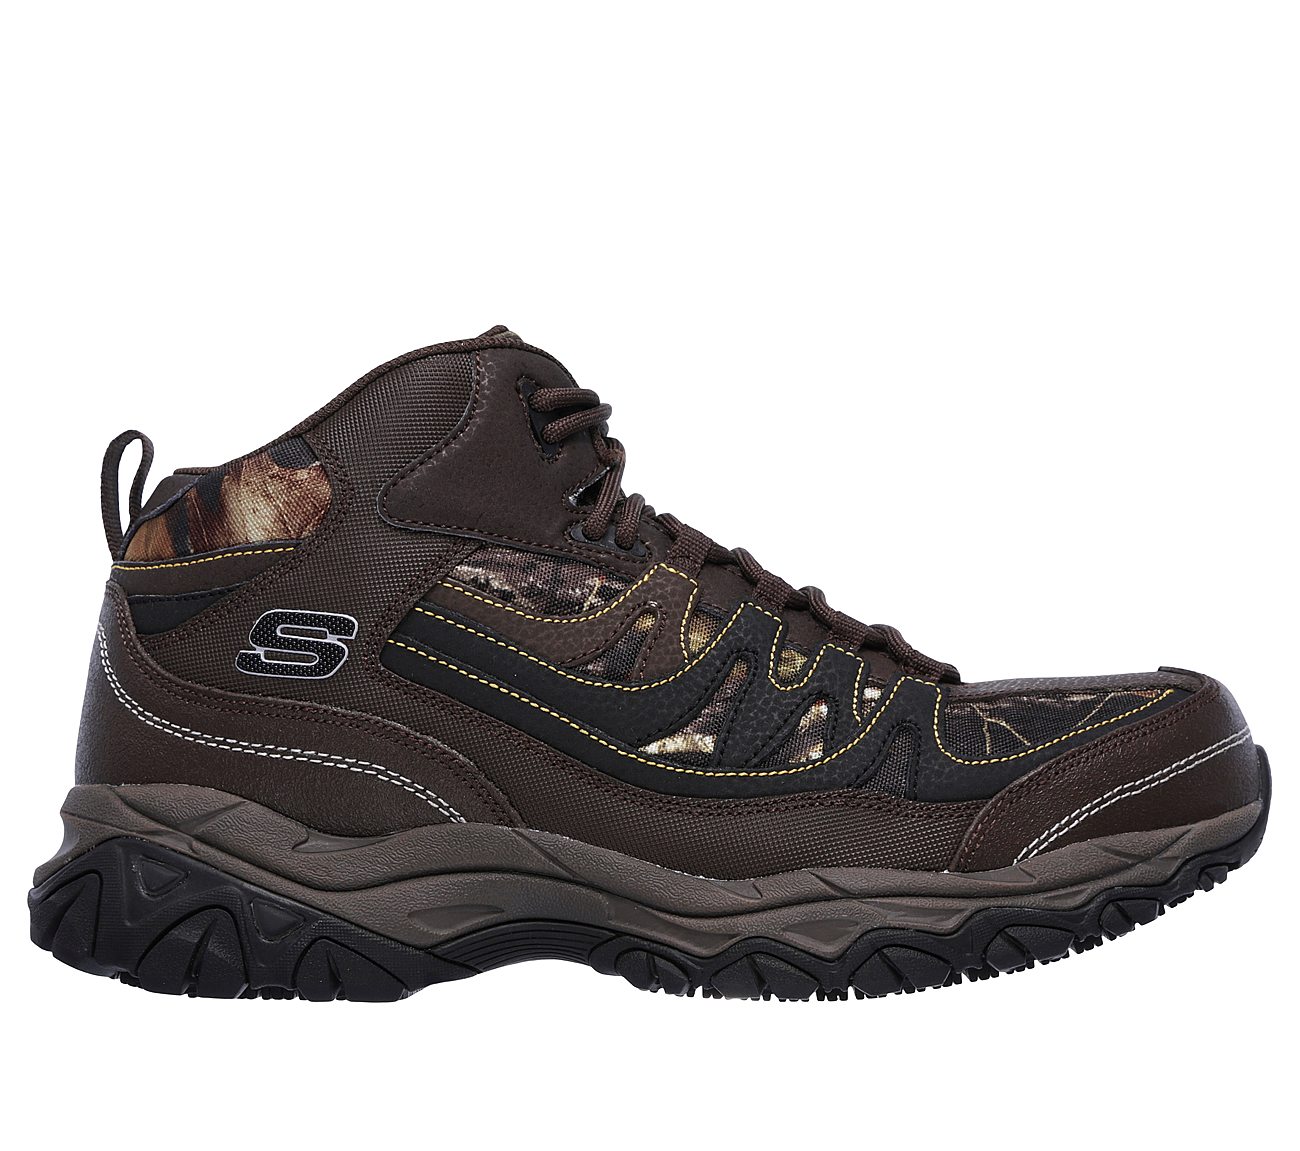 Buy SKECHERS Work Relaxed Fit: Holdredge - Rebem ST Work Shoes